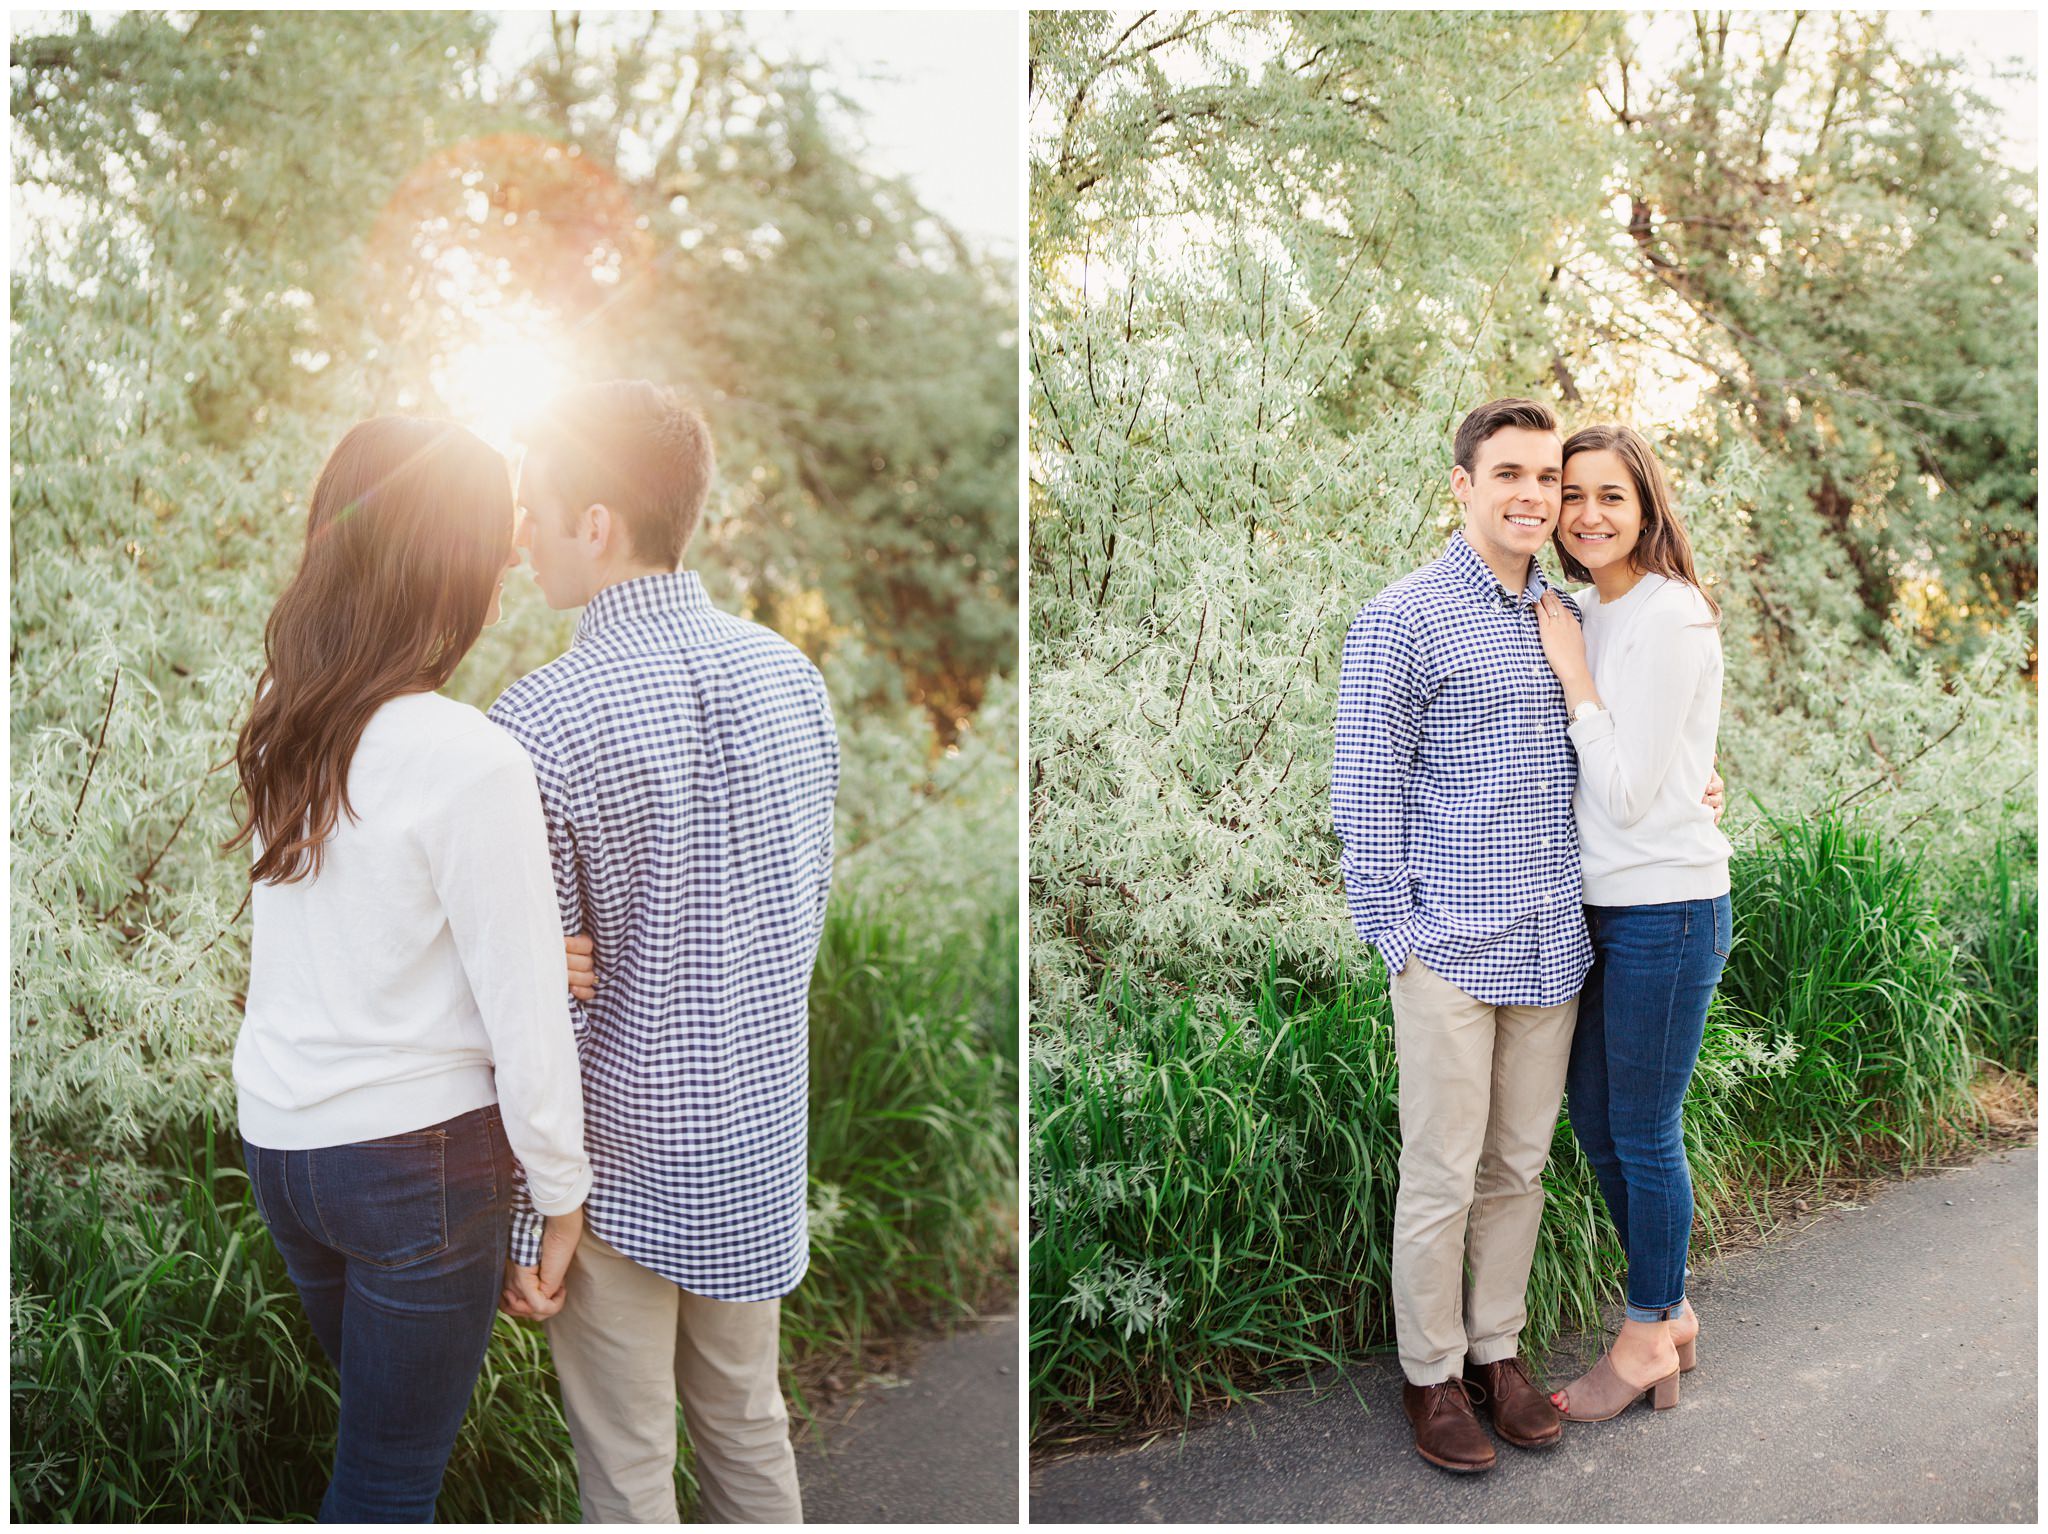 Engagement photos with the groom wearing a blue shirt and the bride wearing a white shirt